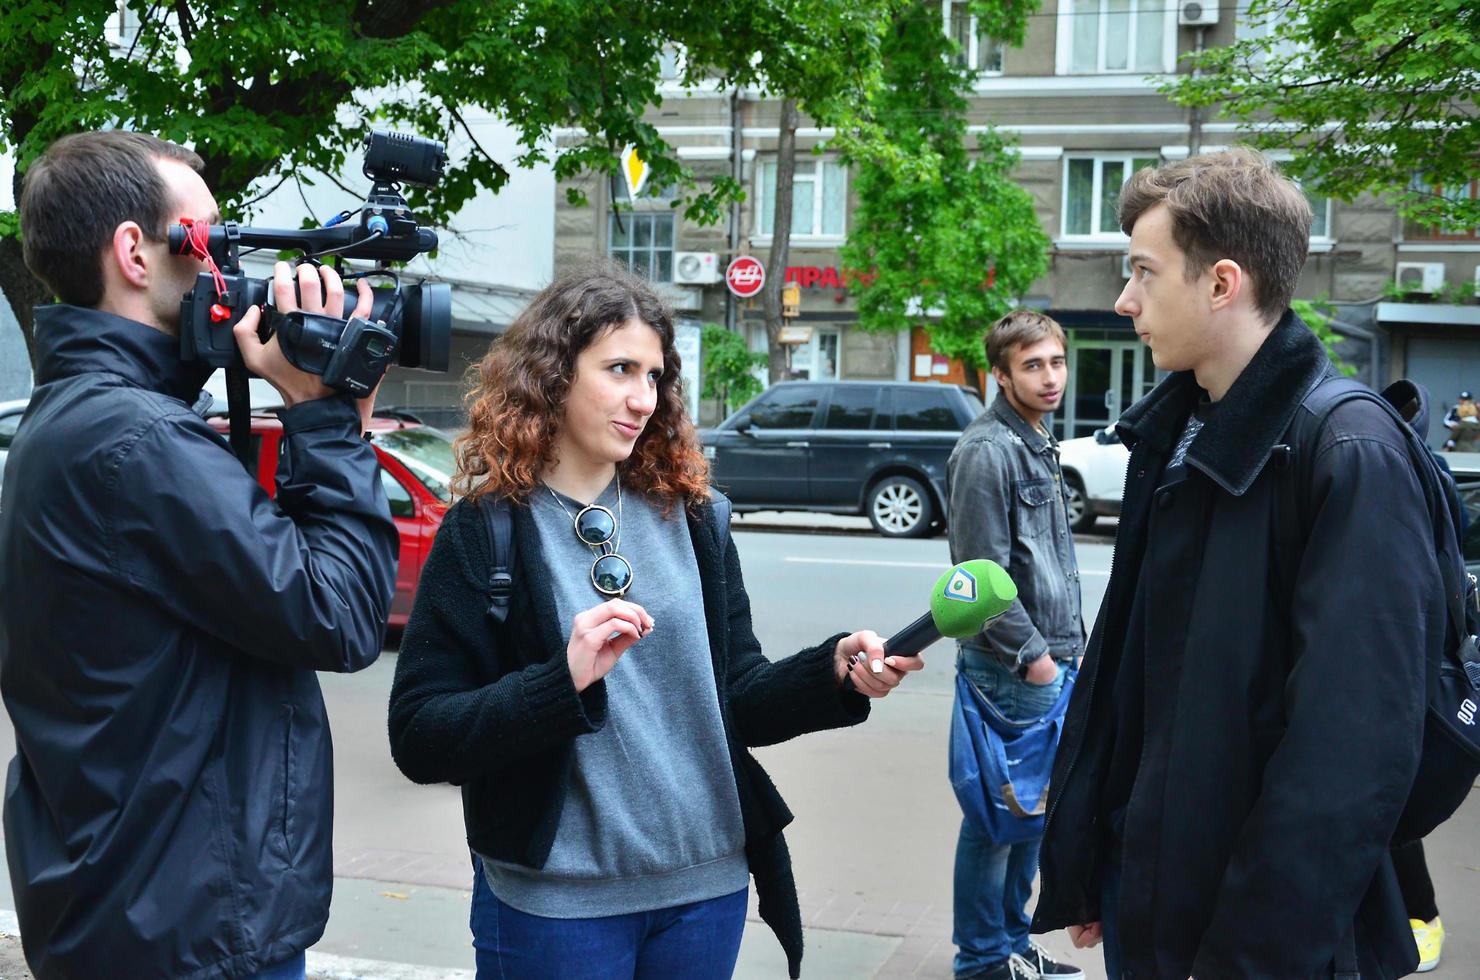 KHARKOV. UKRAINE - MAY 17, 2022 Participants of the first LGBT action in Kharkov give interviews about an unexpected attack and disruption of the event photo